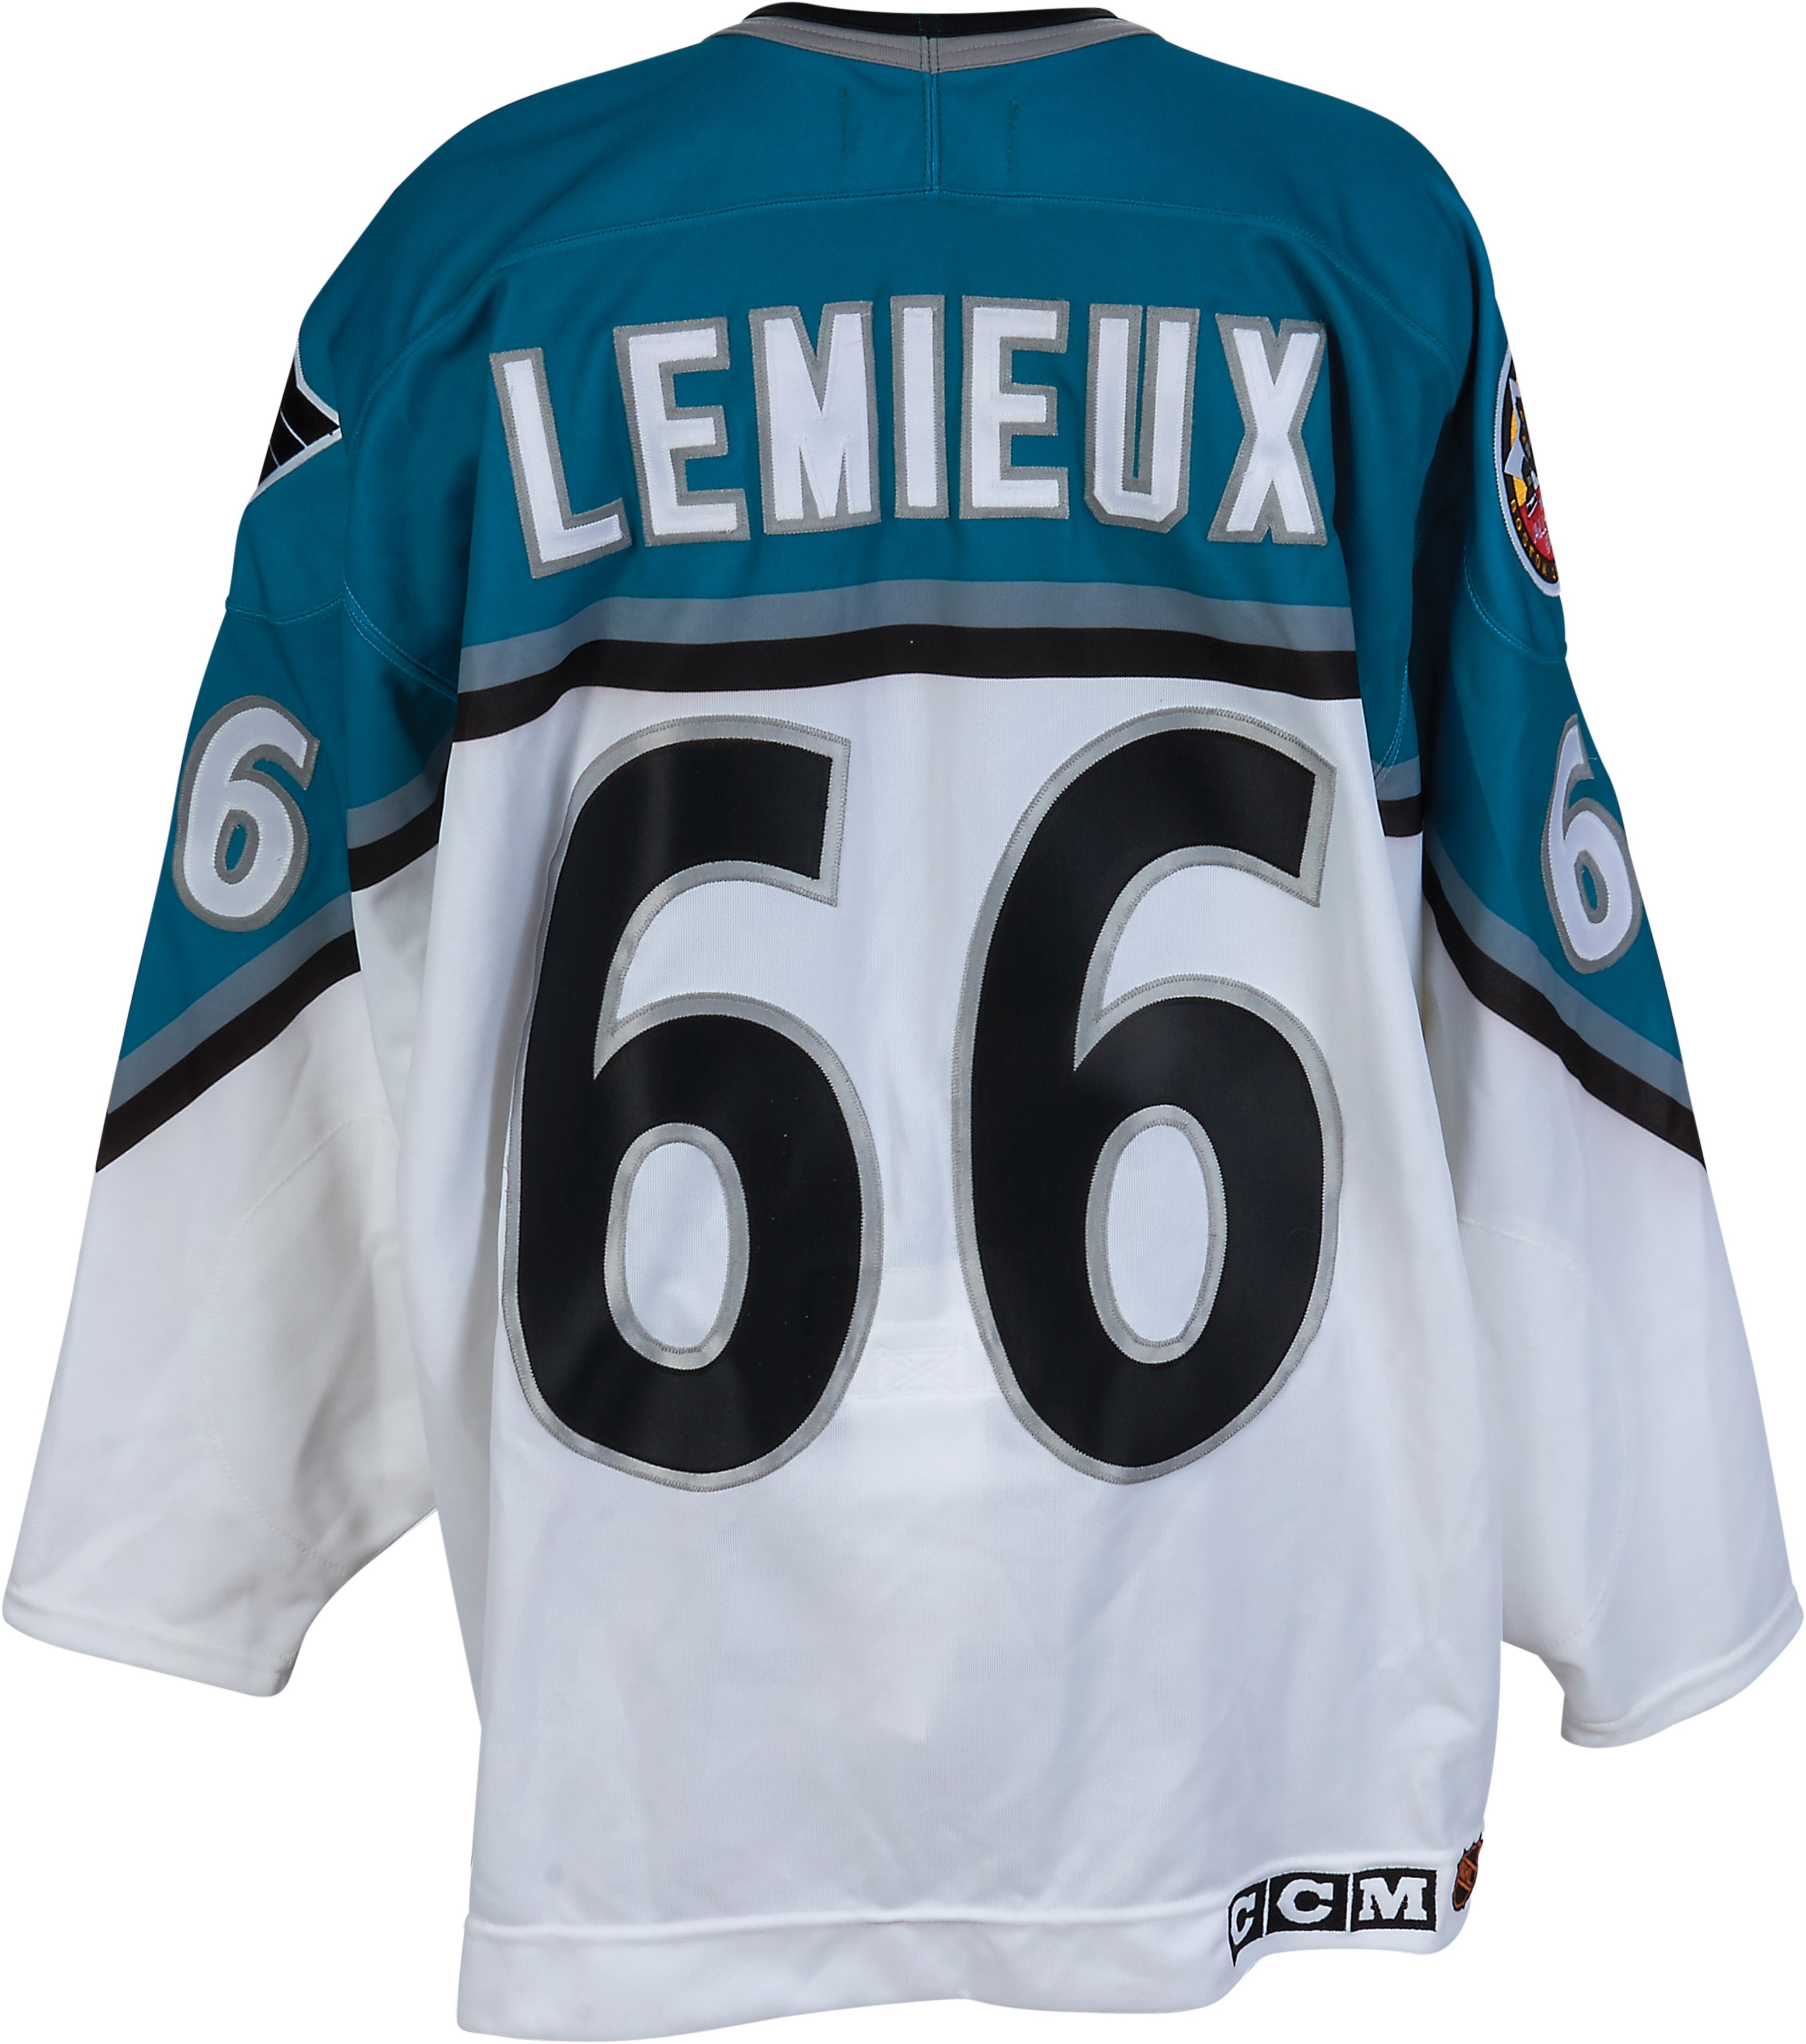 - 1996 Mario Lemieux NHL All-Star Game Worn Jersey (Photo-Matched)